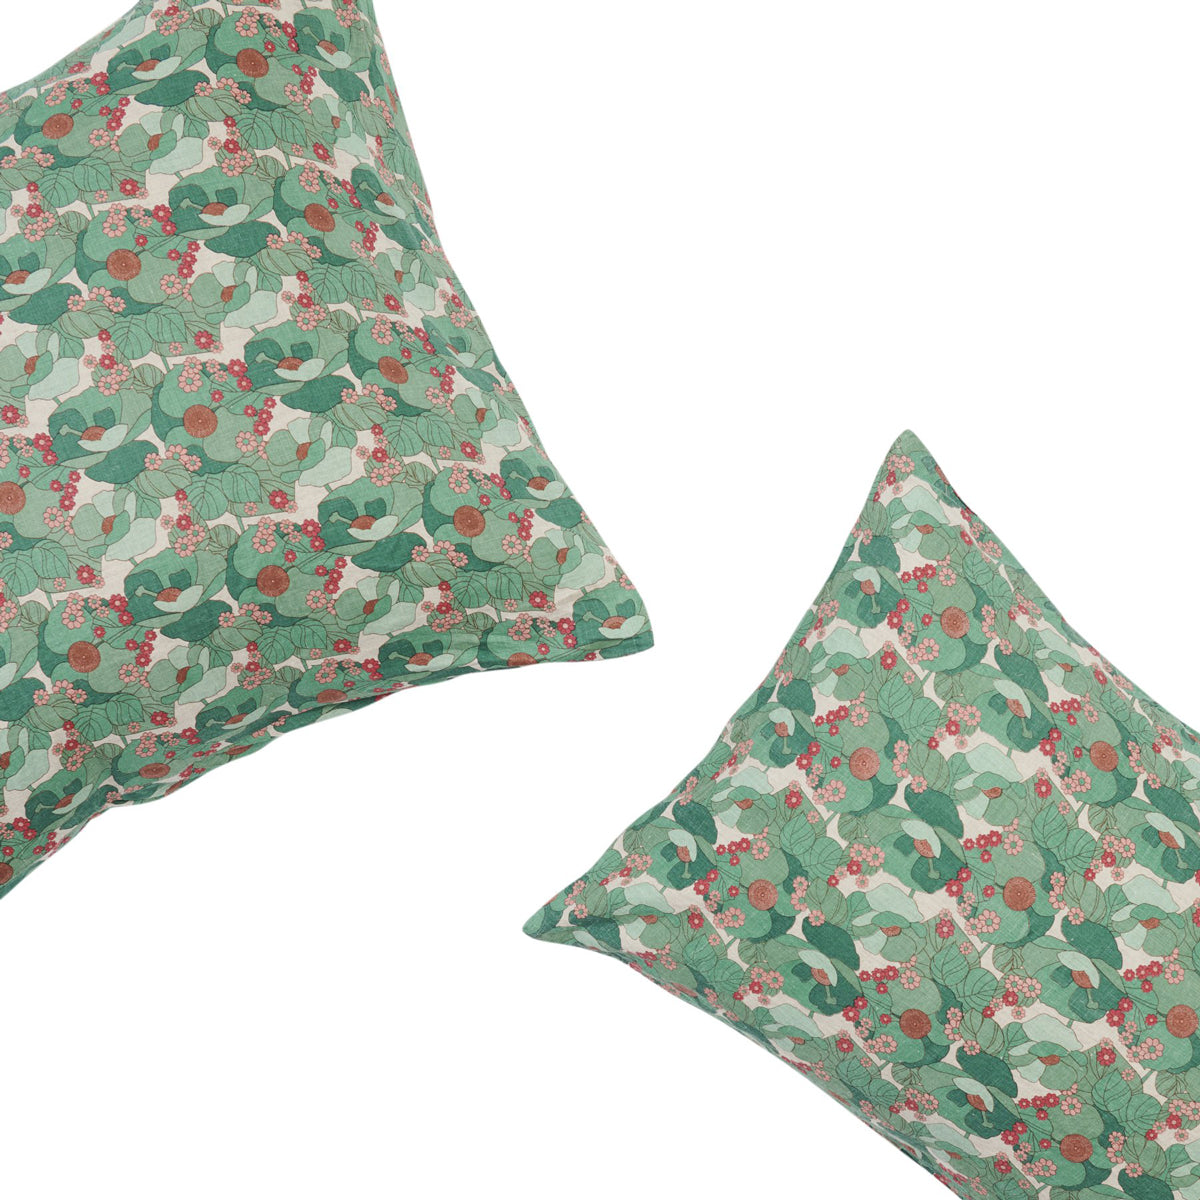 Society of wanderers winifred Floral Pillowcase Sets